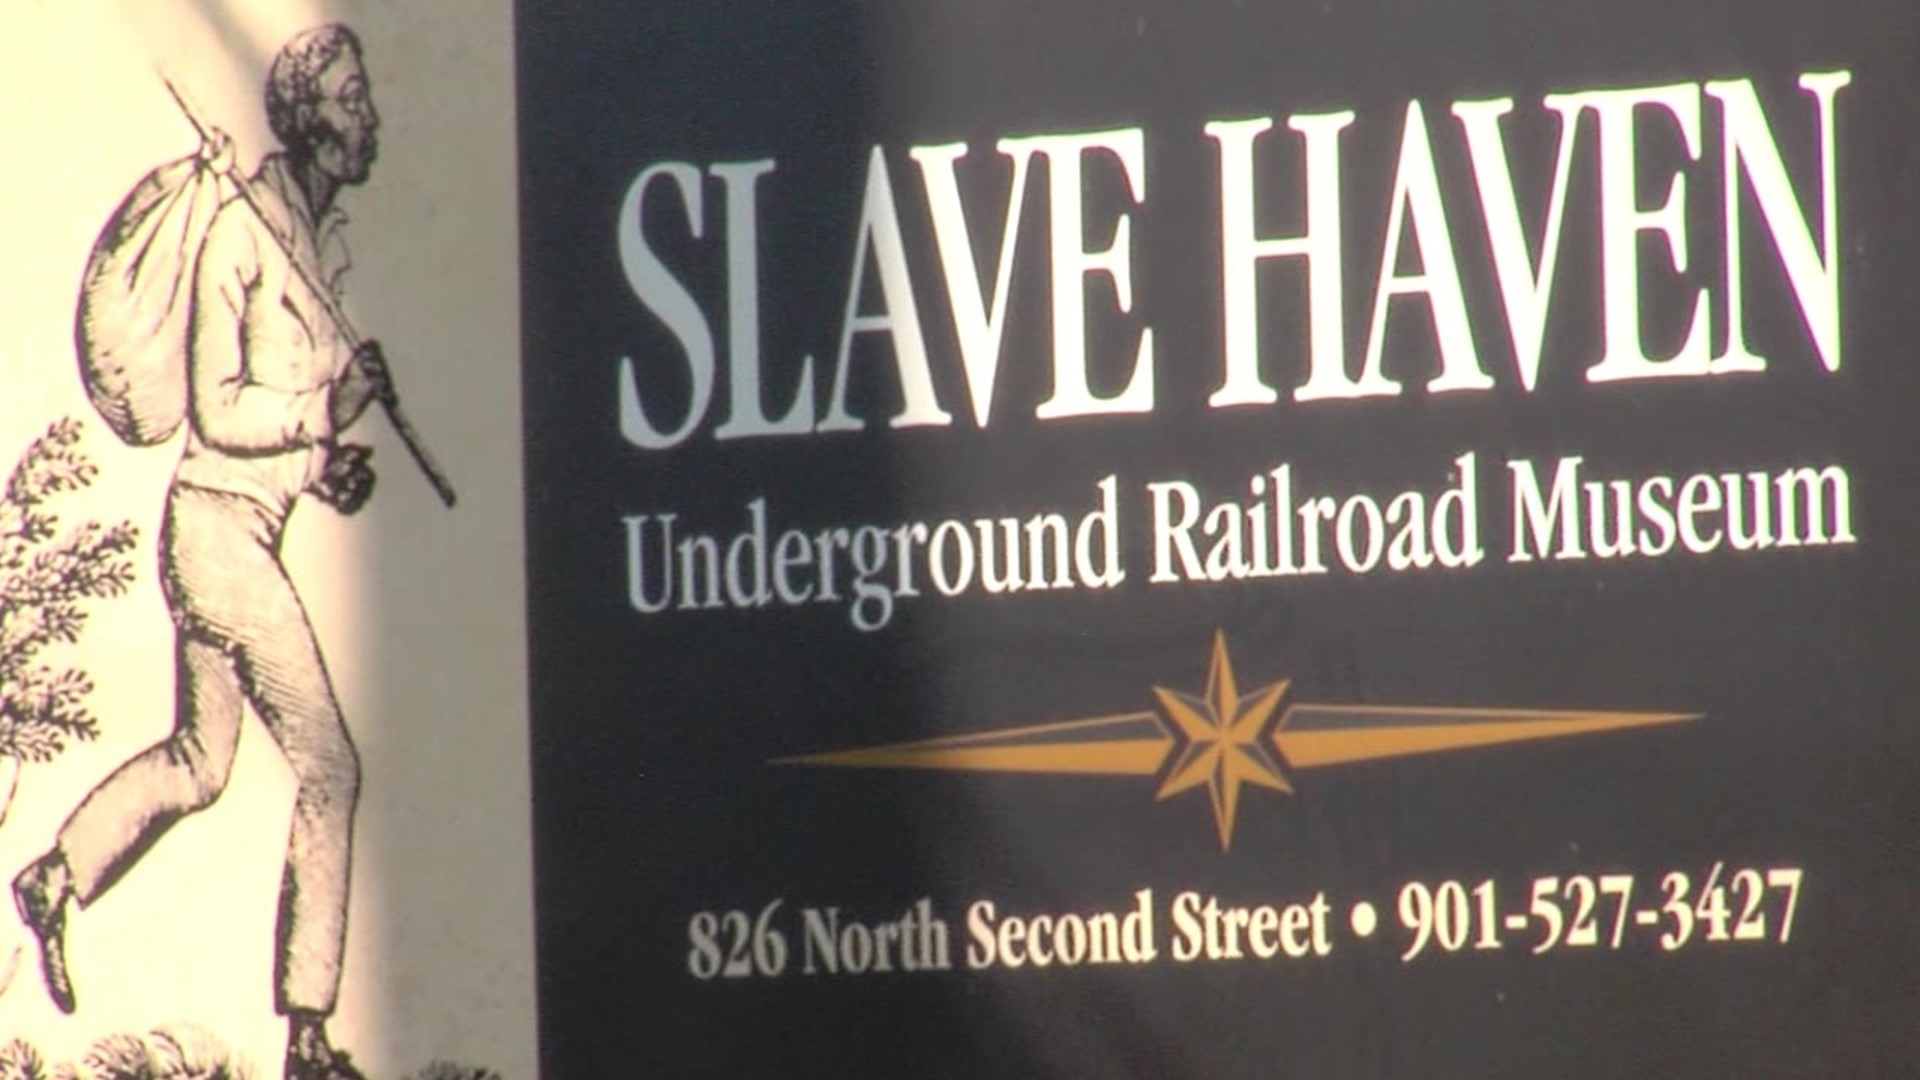 WEB EXTRA: Slave Haven Underground Railroad Museum in Memphis documents 400 years of slavery in the United States